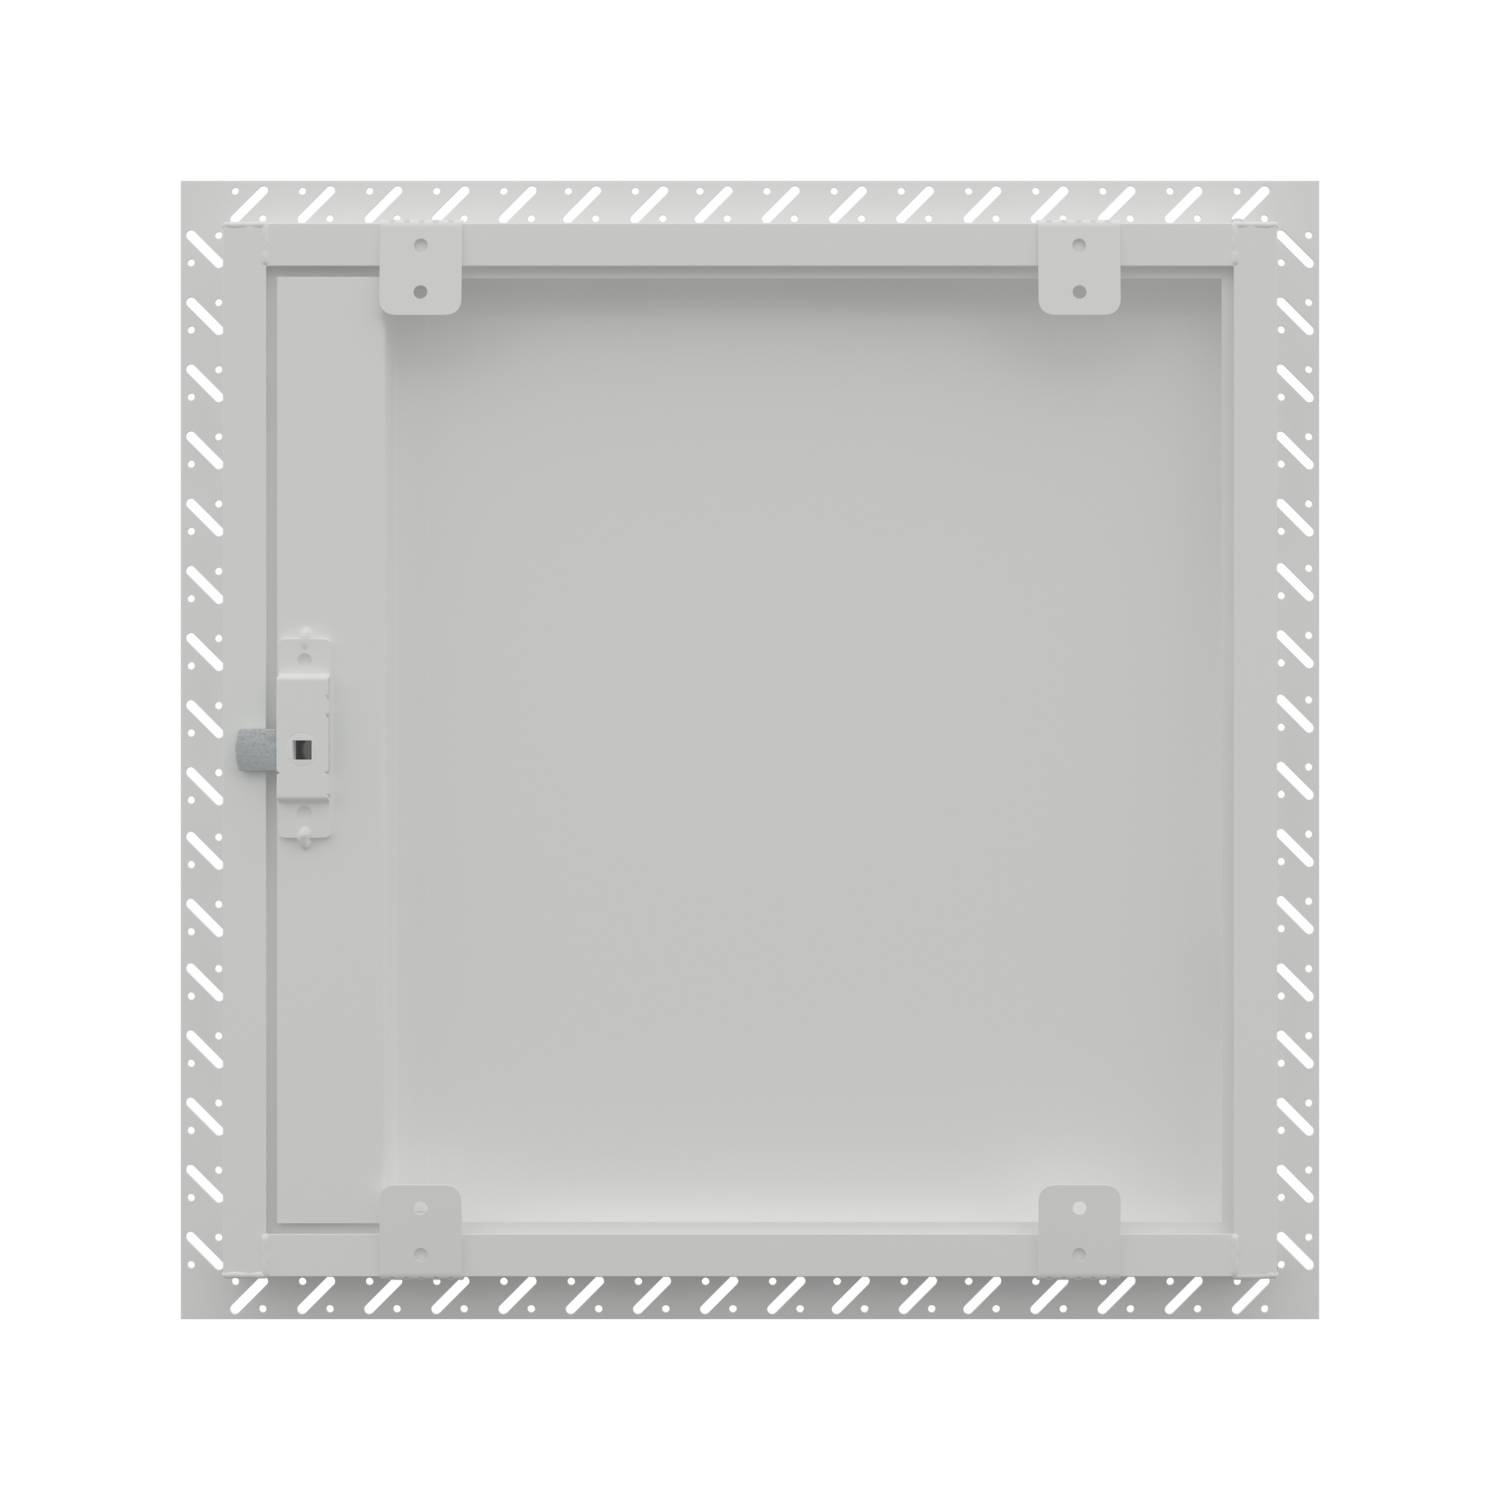 Slimfit Metal Access Panel (EX01 Range) - Non Fire Rated - Wall and Ceiling Access Panel